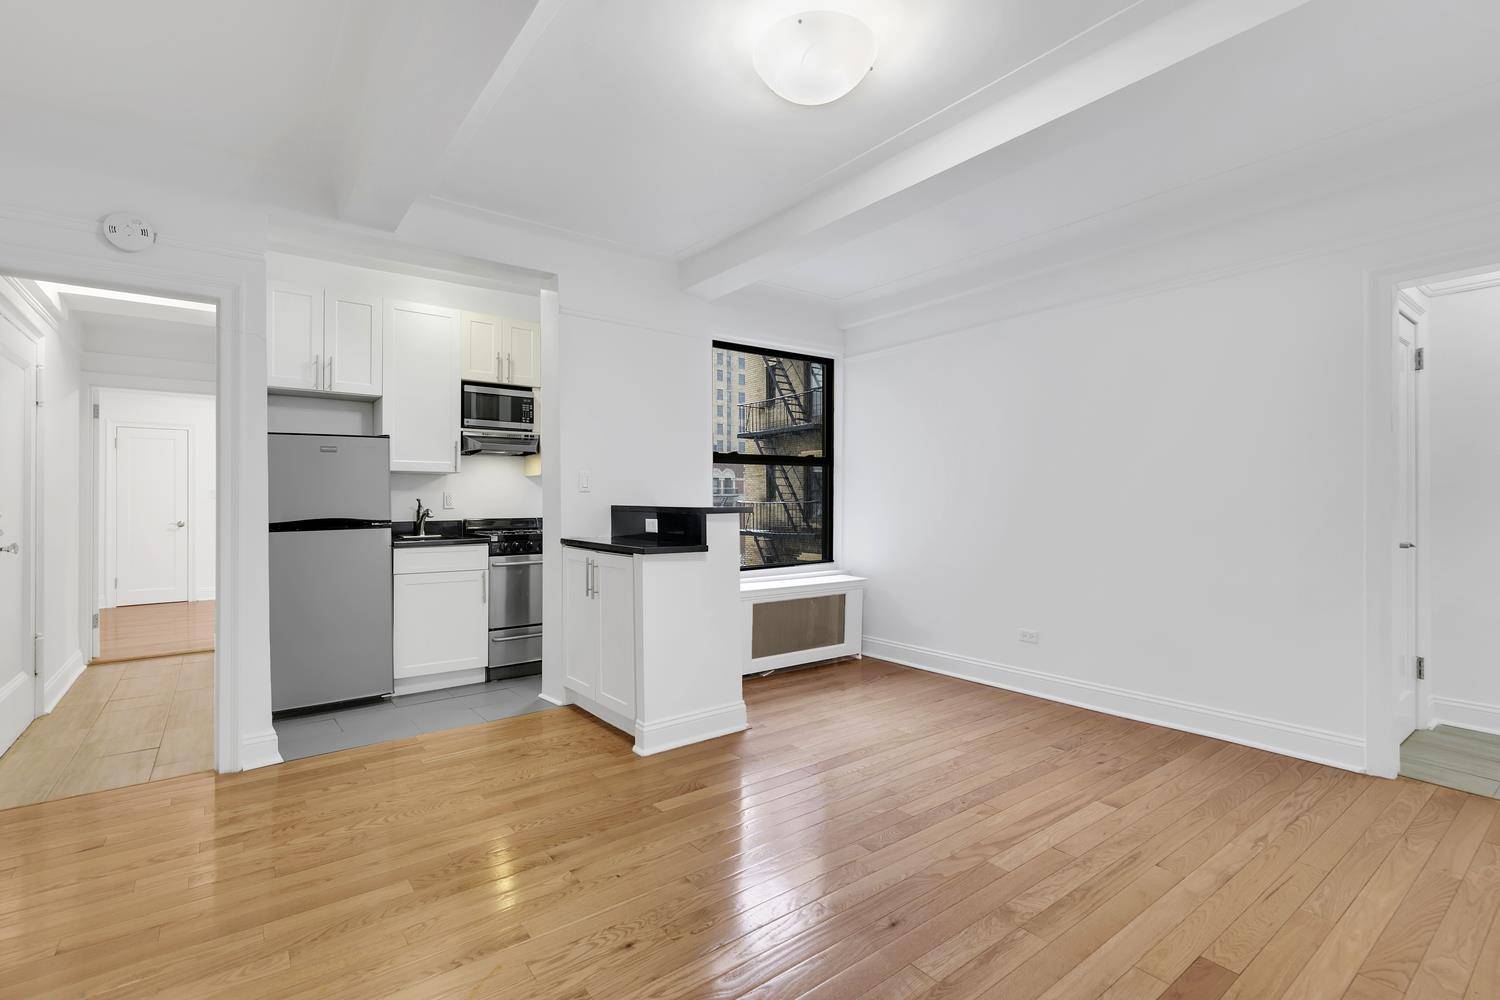 Prime Brooklyn Heights Location52 Clark Street, Apt 6MNO FEEVIRTUAL TOURS AVAILABLE UPON REQUESTABOUT THE APARTMENT Open Sky Views From Both Bedroom AND Living Room !